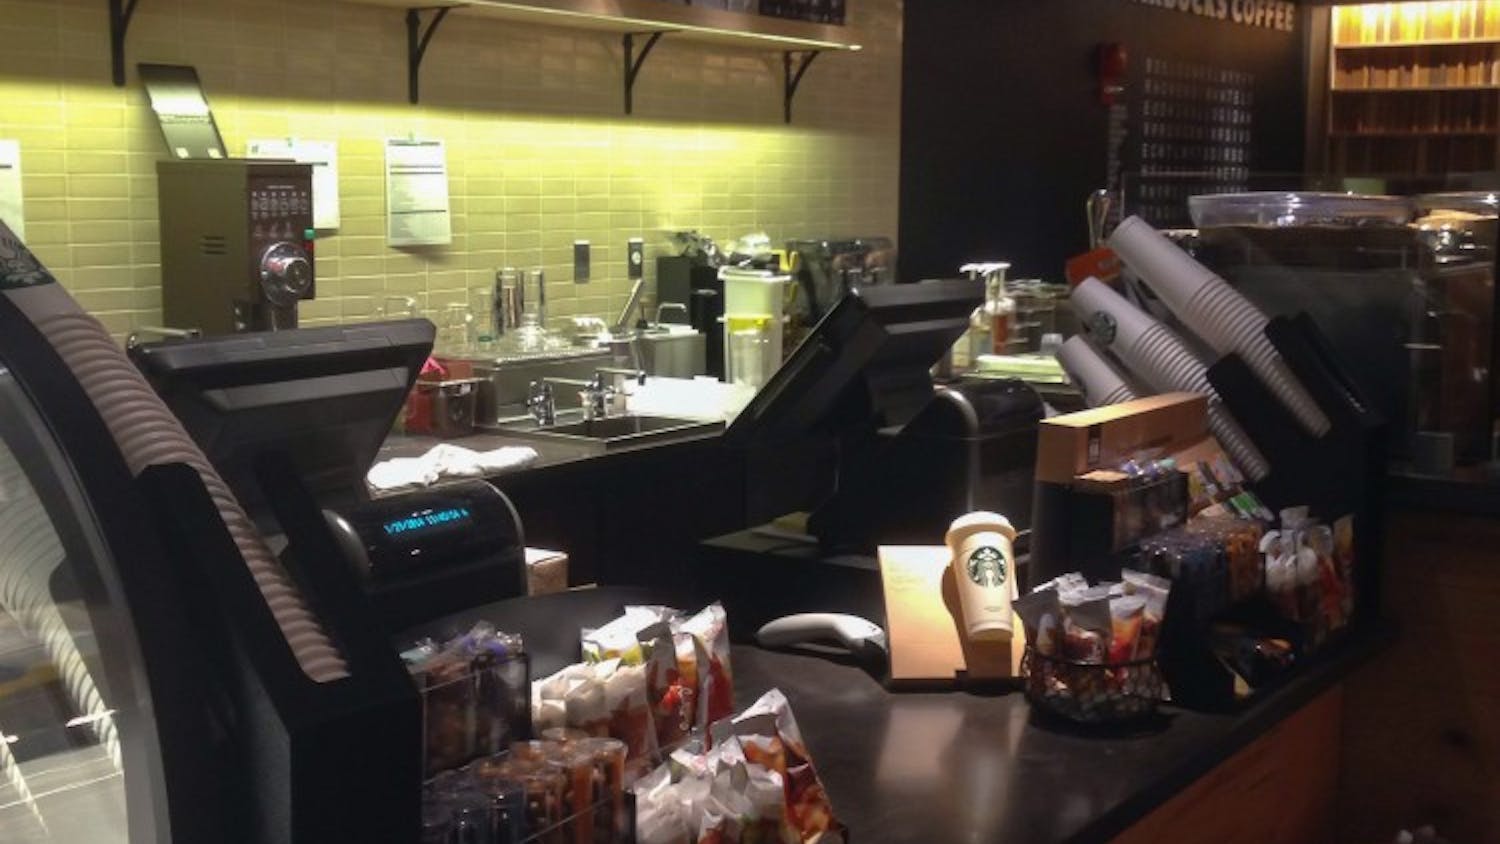 	The front counter of the store is located on the left side of the store, featuring similar qualities to other Starbucks locations.